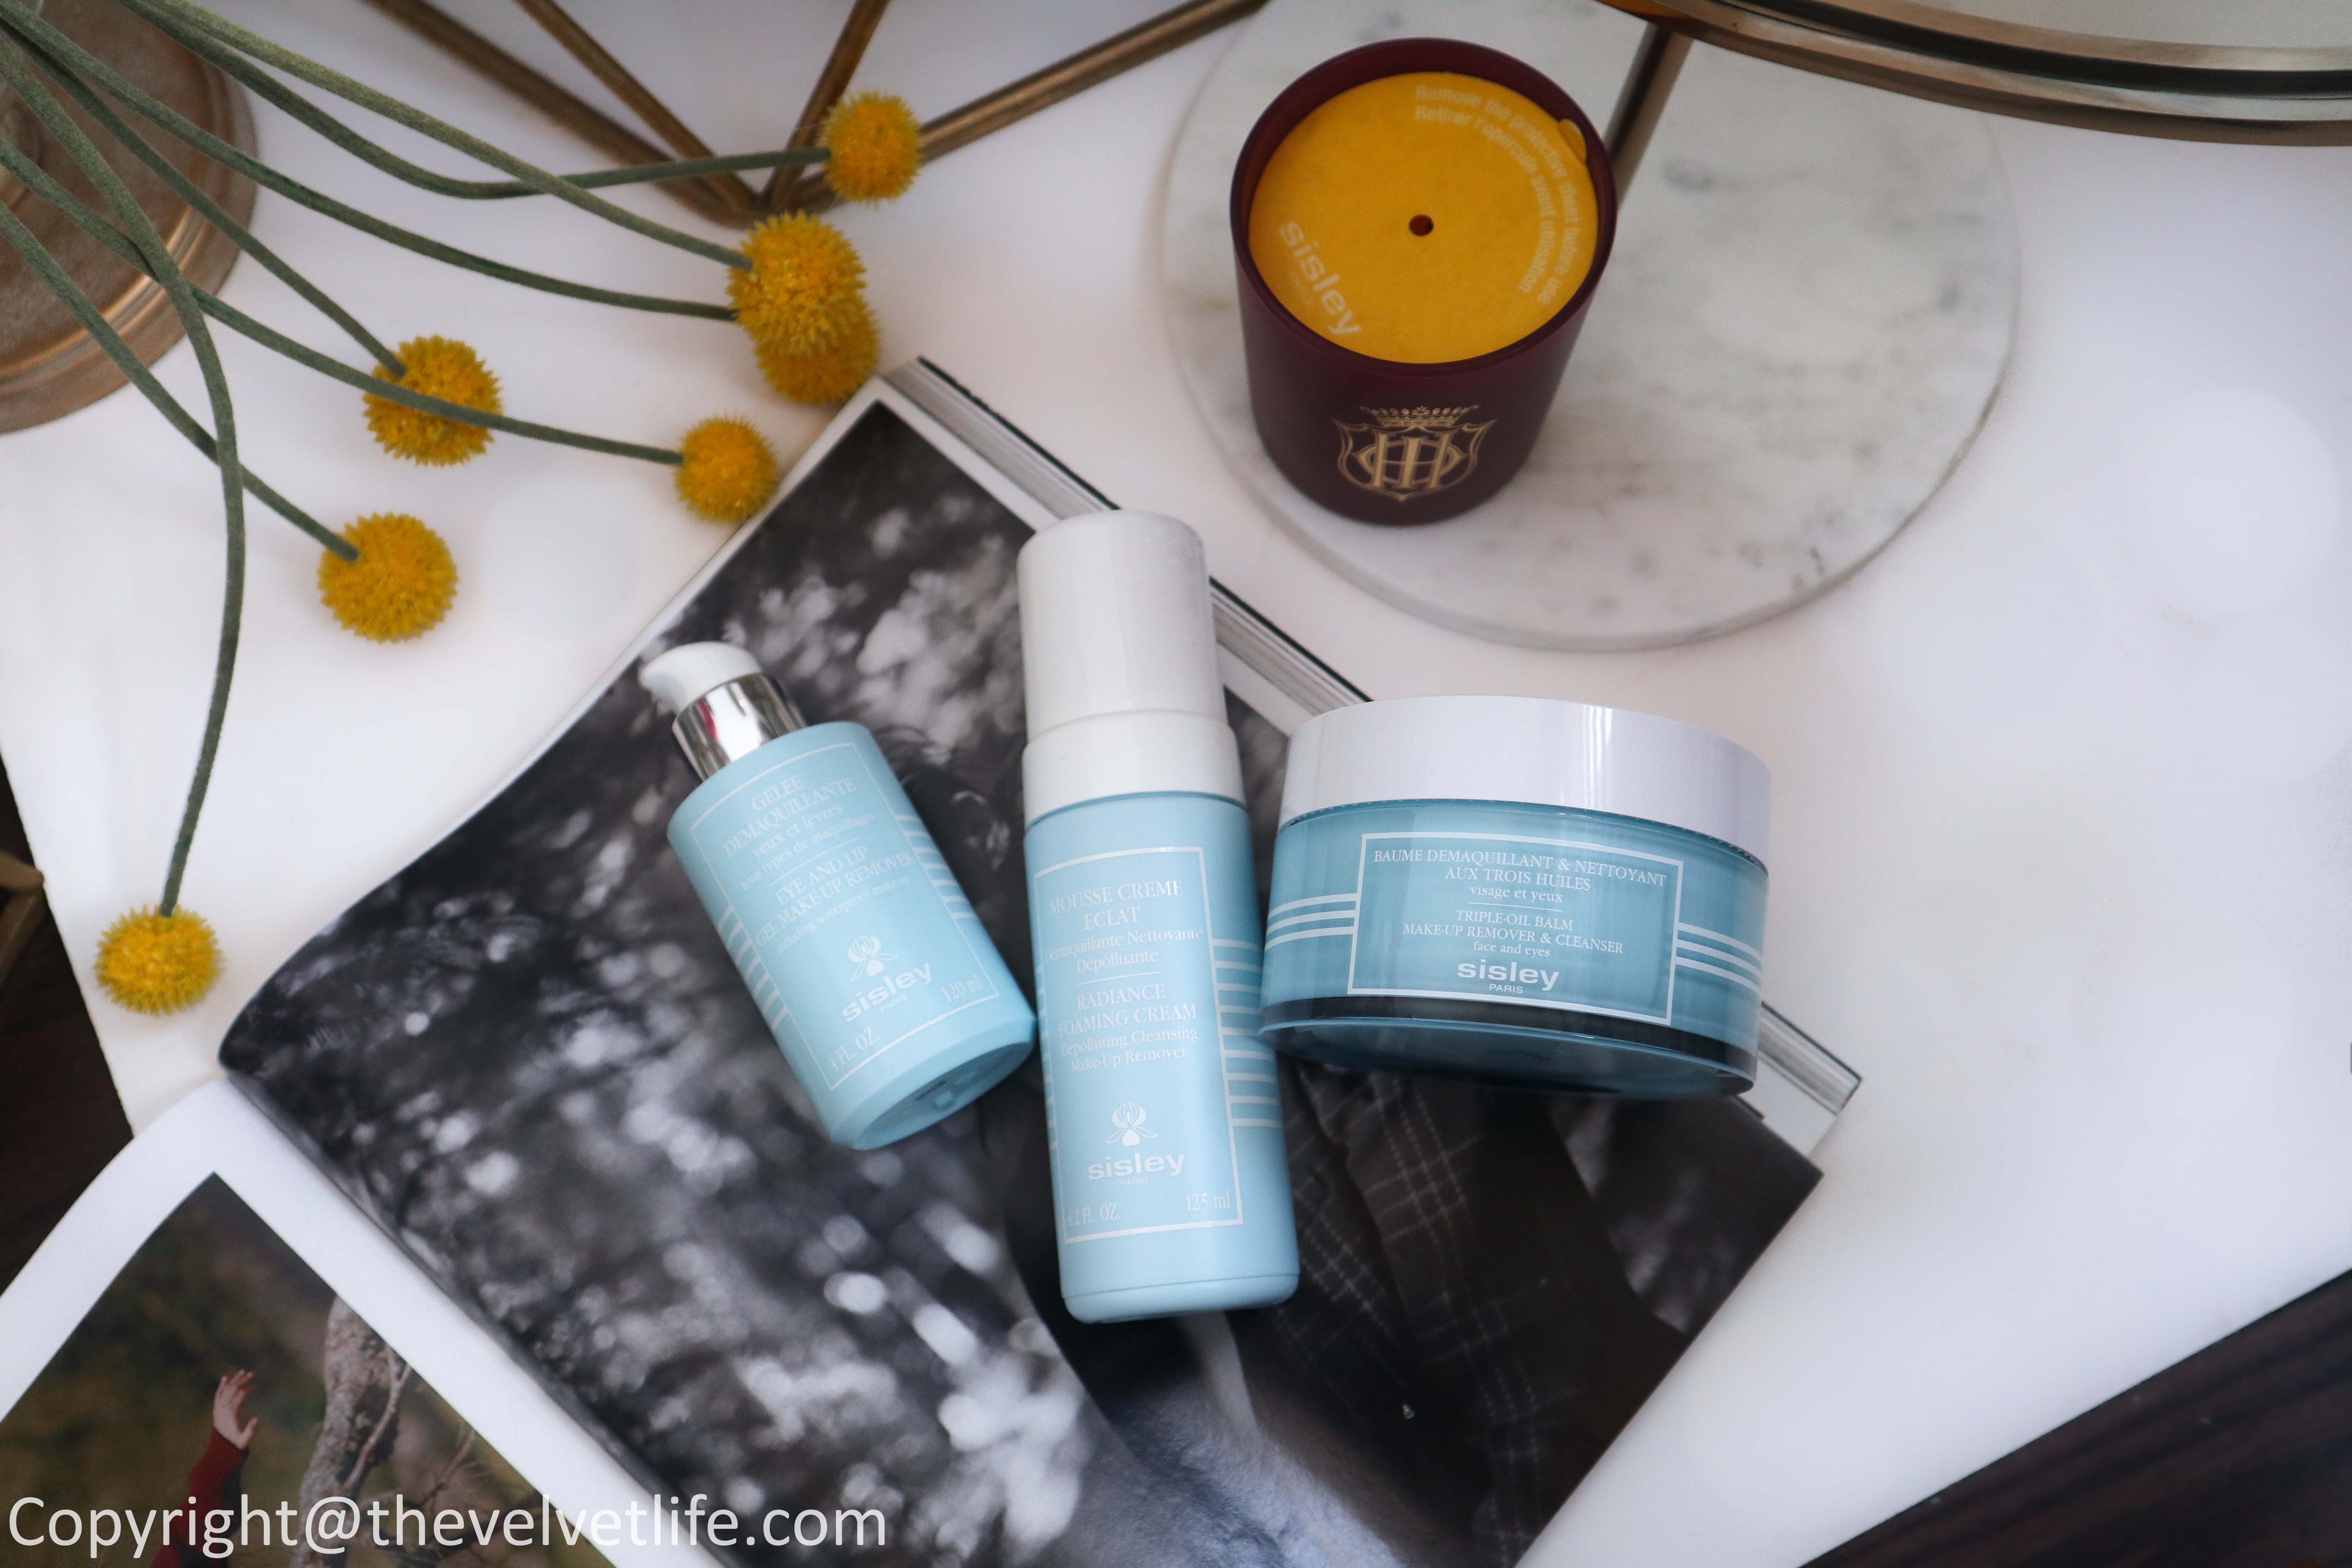 New Sisley Paris Radiance Foaming Cream Cleanser review